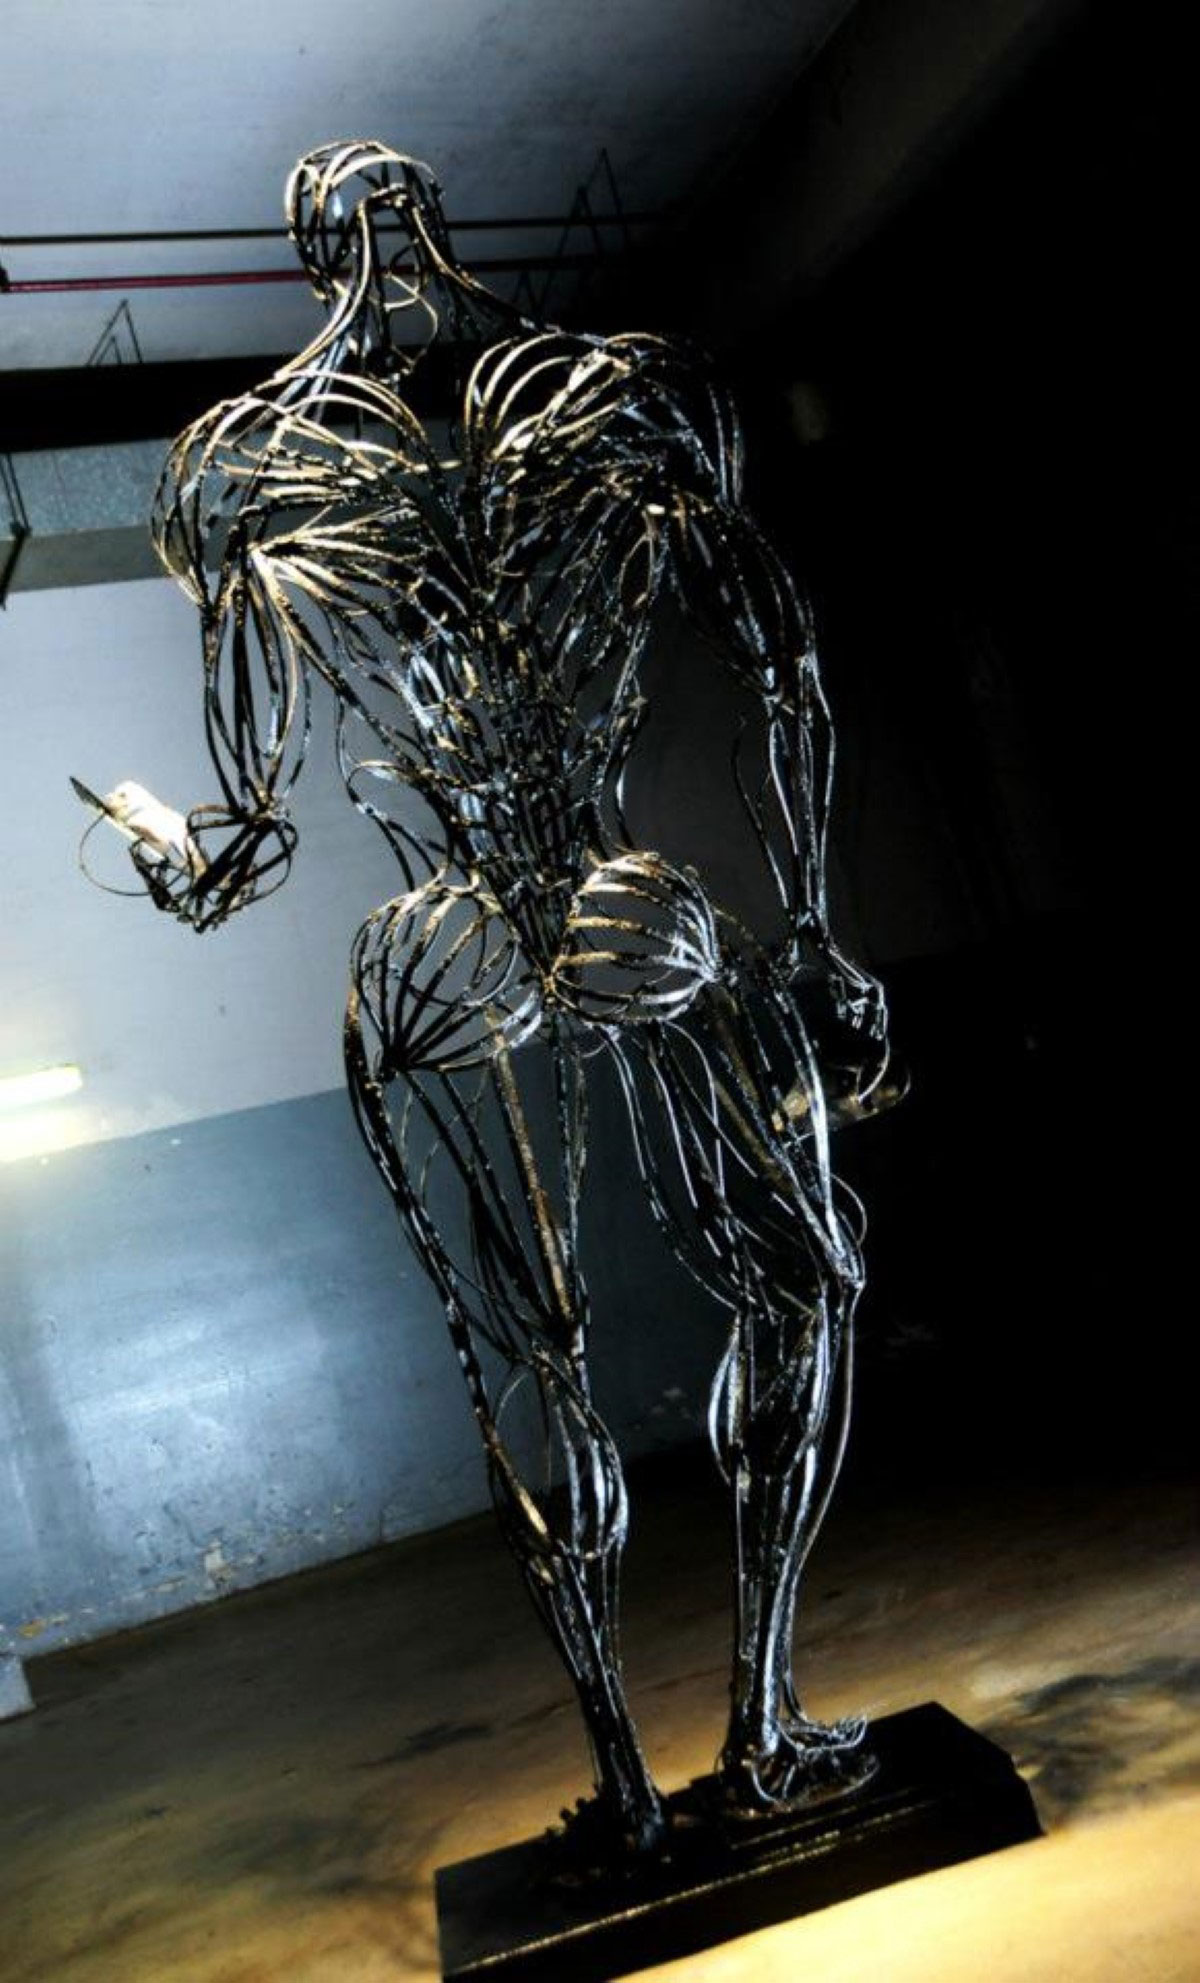 A steel line sculpture of a man’s full body from the back called ‘Anatomy of Hope’.